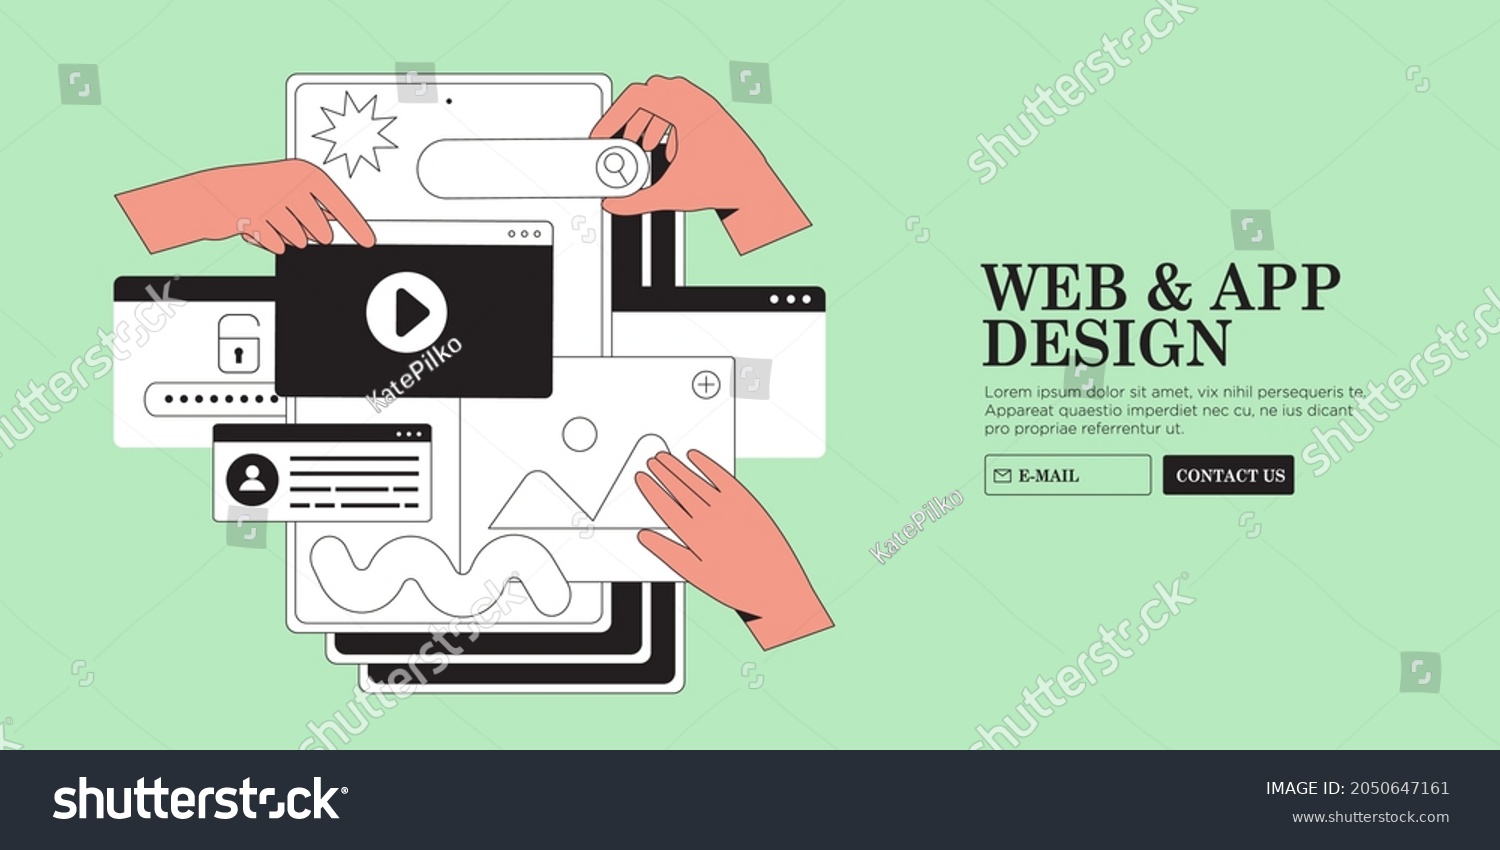 SVG of Hands are working on website or web page, ui ux design or mobile application redesign. Studio or agency prototyping or coding web page. Mobile app development vector illustration in outline style. svg